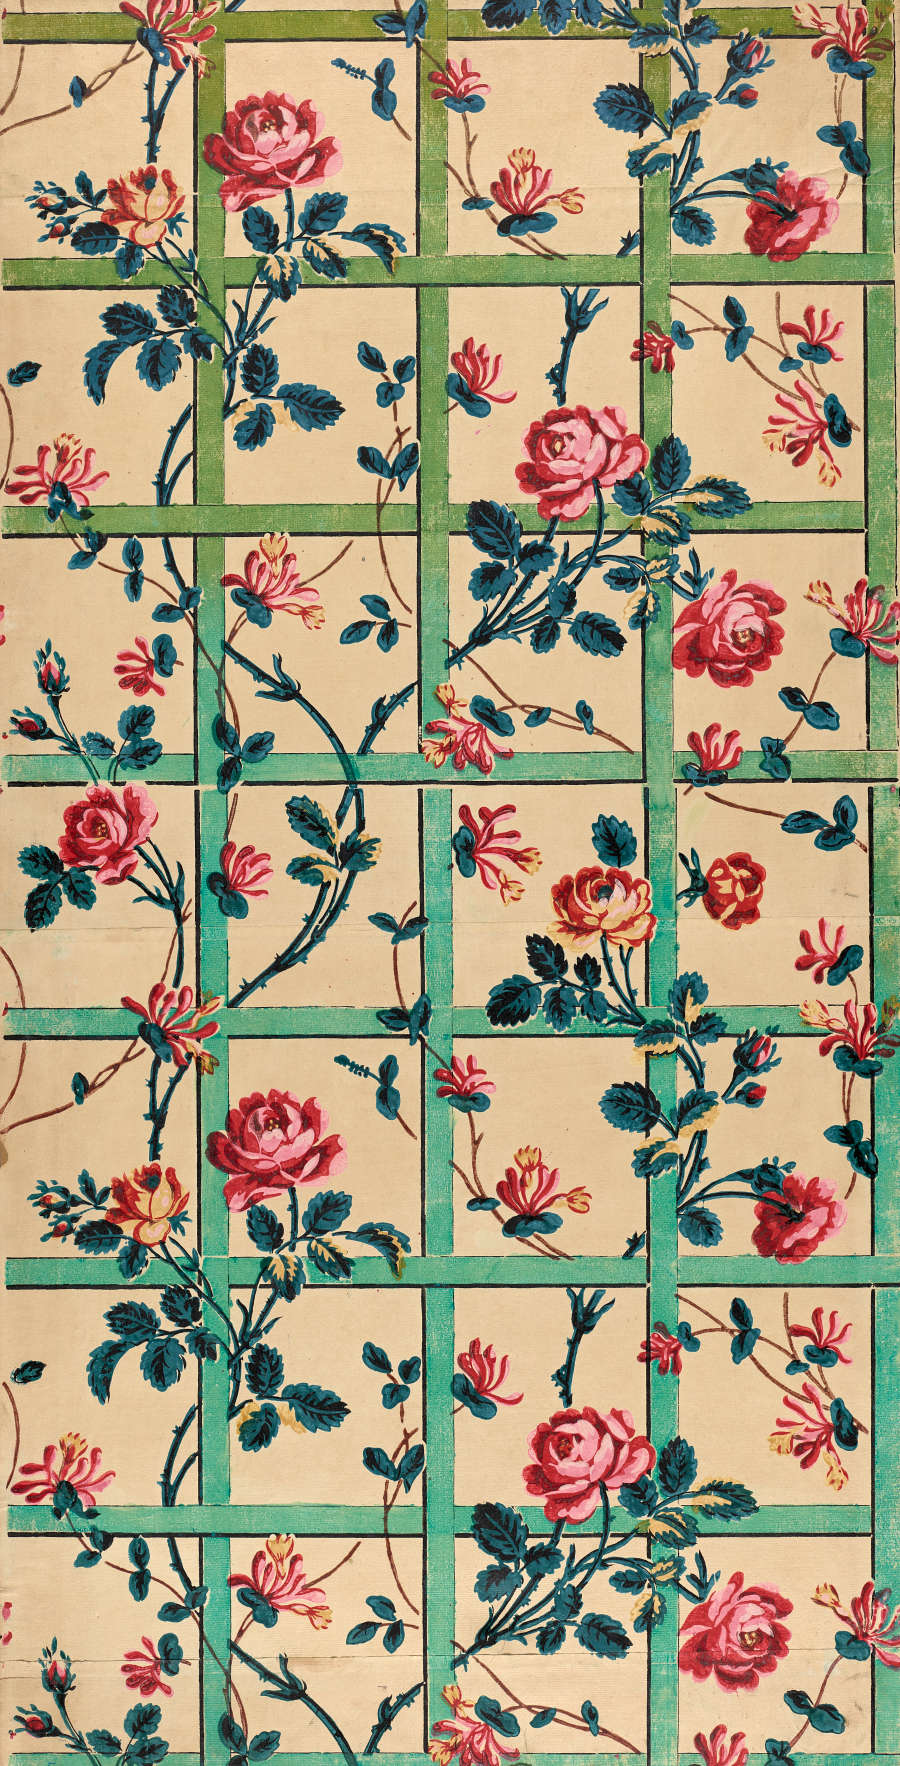 Panel of vintage wallpaper with a classic floral pattern featuring rows of roses in pink and orange hues, intersected by geometric green trellis designs on a pale yellow background.